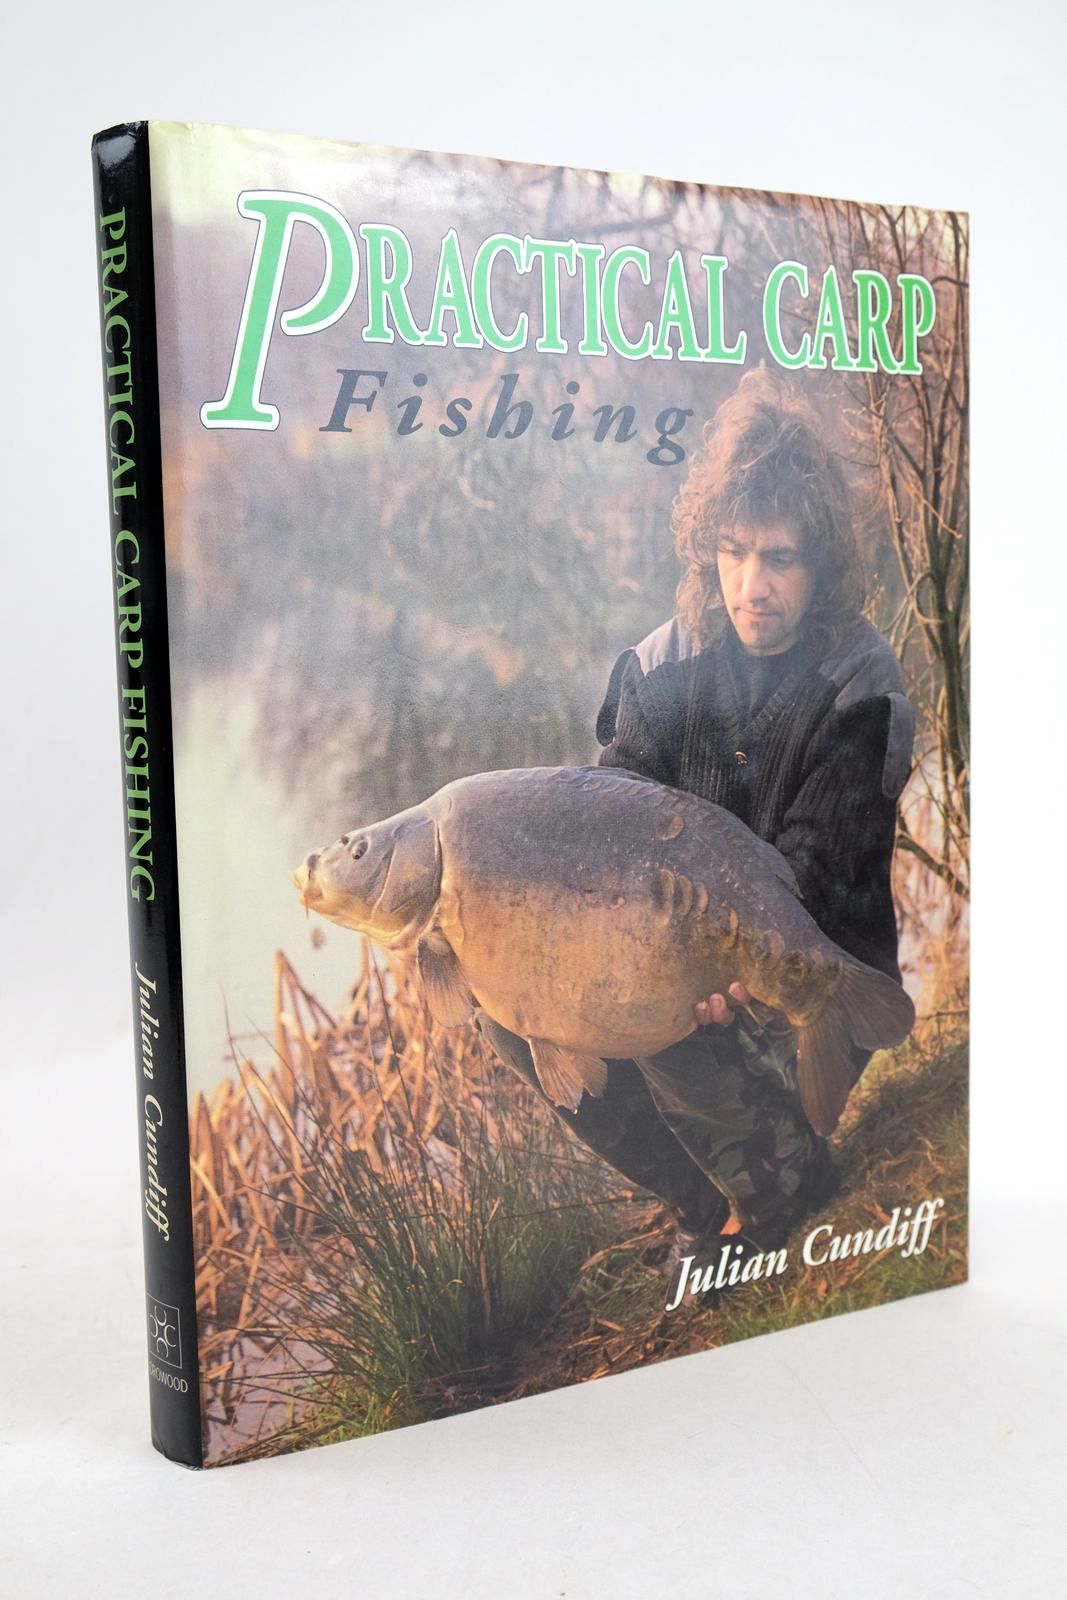 Photo of PRATICAL CARP FISHING written by Cundiff, Julian published by The Crowood Press (STOCK CODE: 1327654)  for sale by Stella & Rose's Books